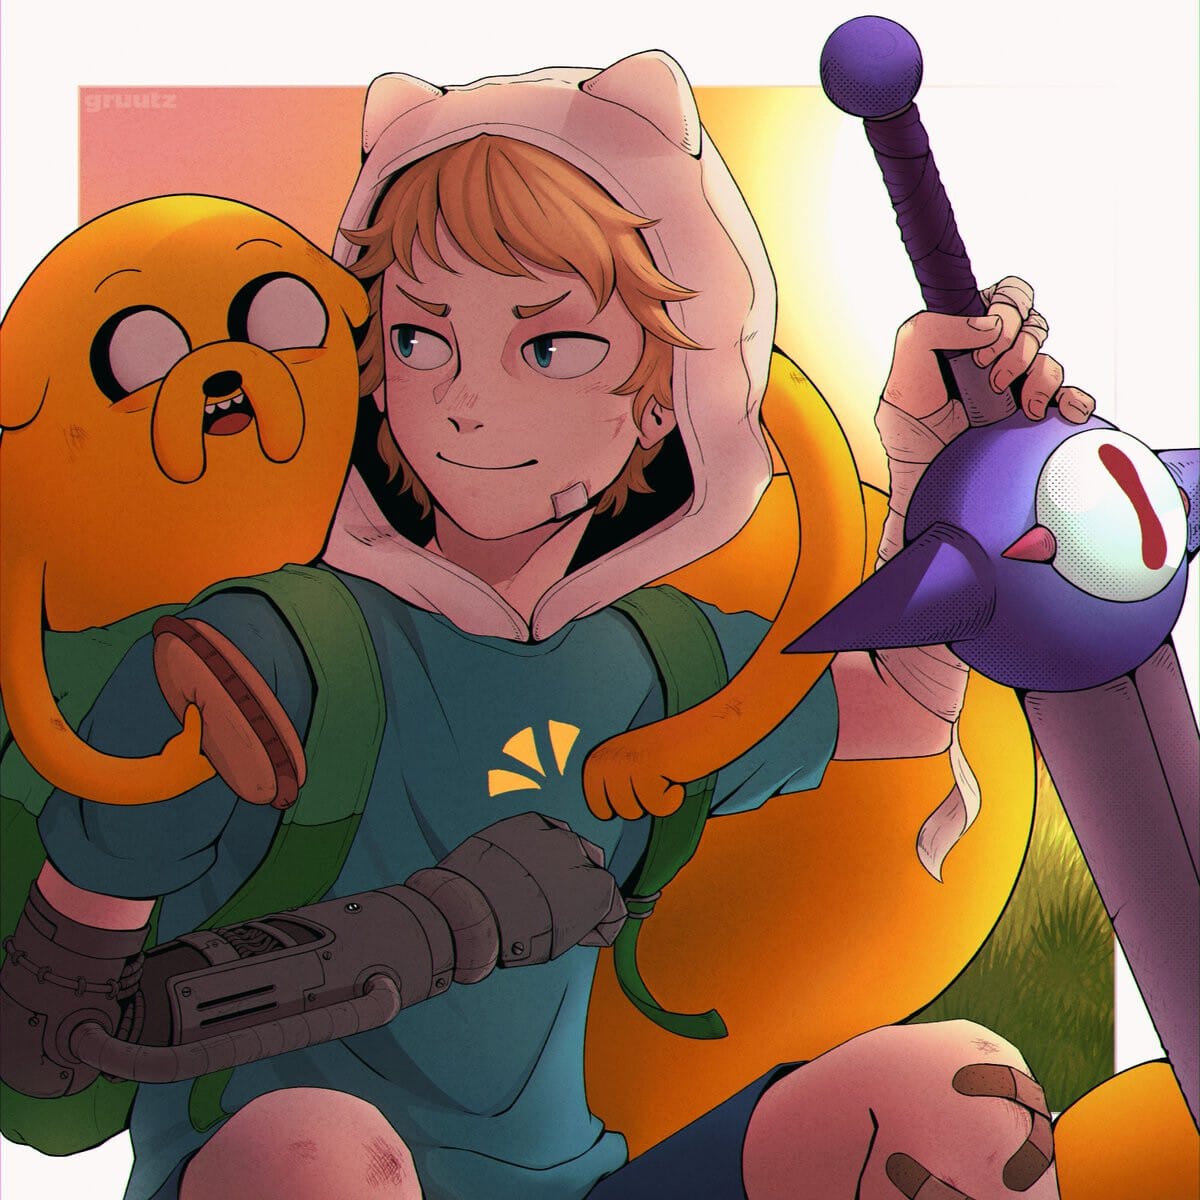 I rewatched adventure time these days and it made me want to draw finn and jake!